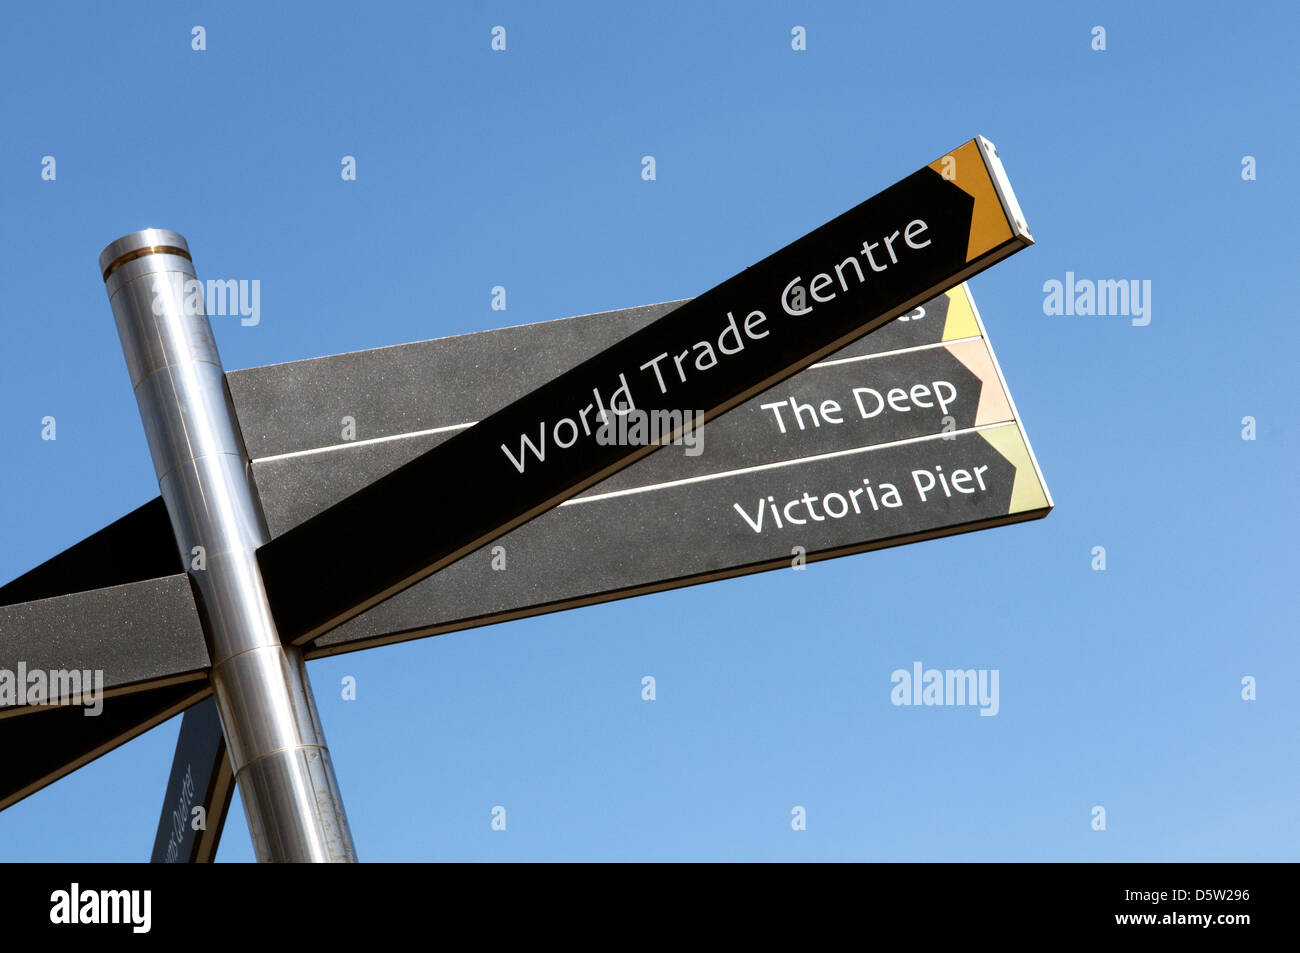 Pictured is the signpost pointing to the World Trade Centre, Victoria Pier and The Deep in Hull. PICTURES BY DARREN CASEY Stock Photo